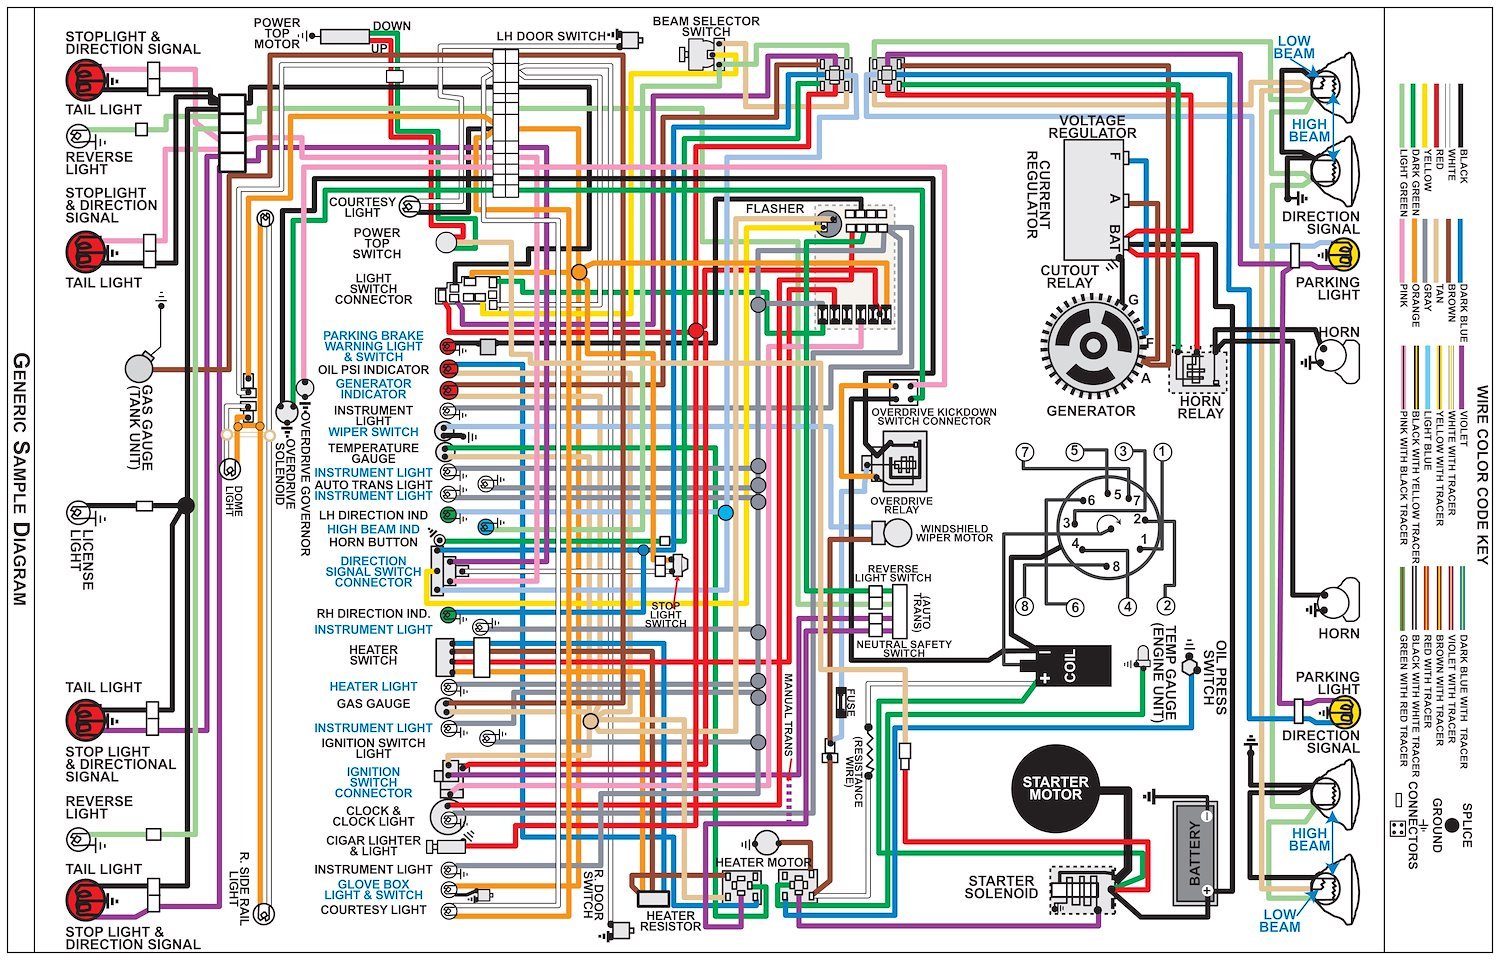 Wiring Diagram for 1949 Mercury, 11 in x 17 in., Laminated